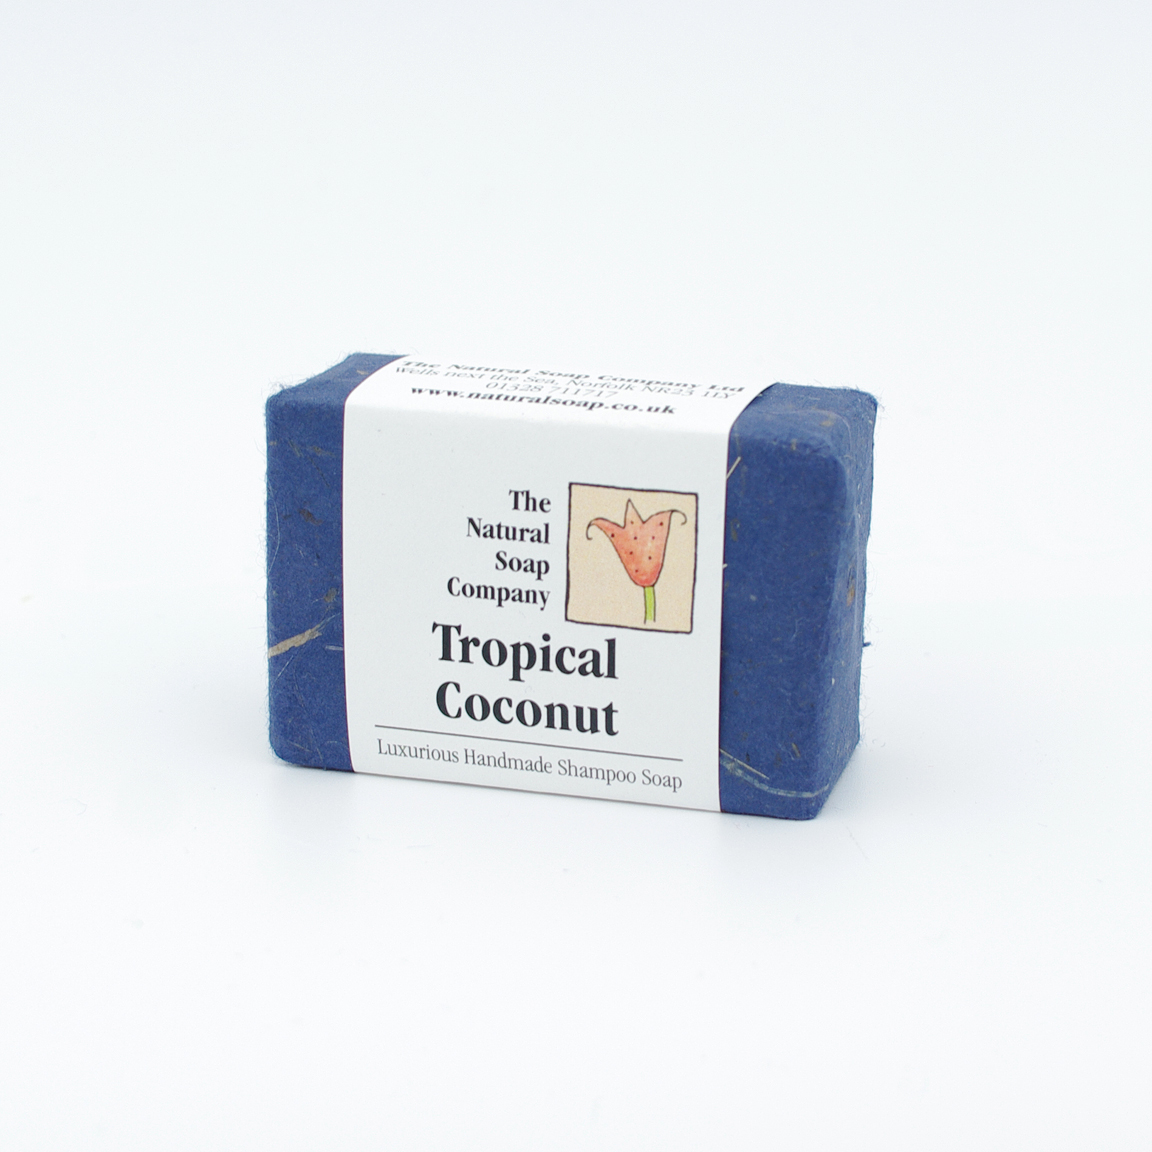 Tropical Coconut Shampoo guest soap, approx 50g 